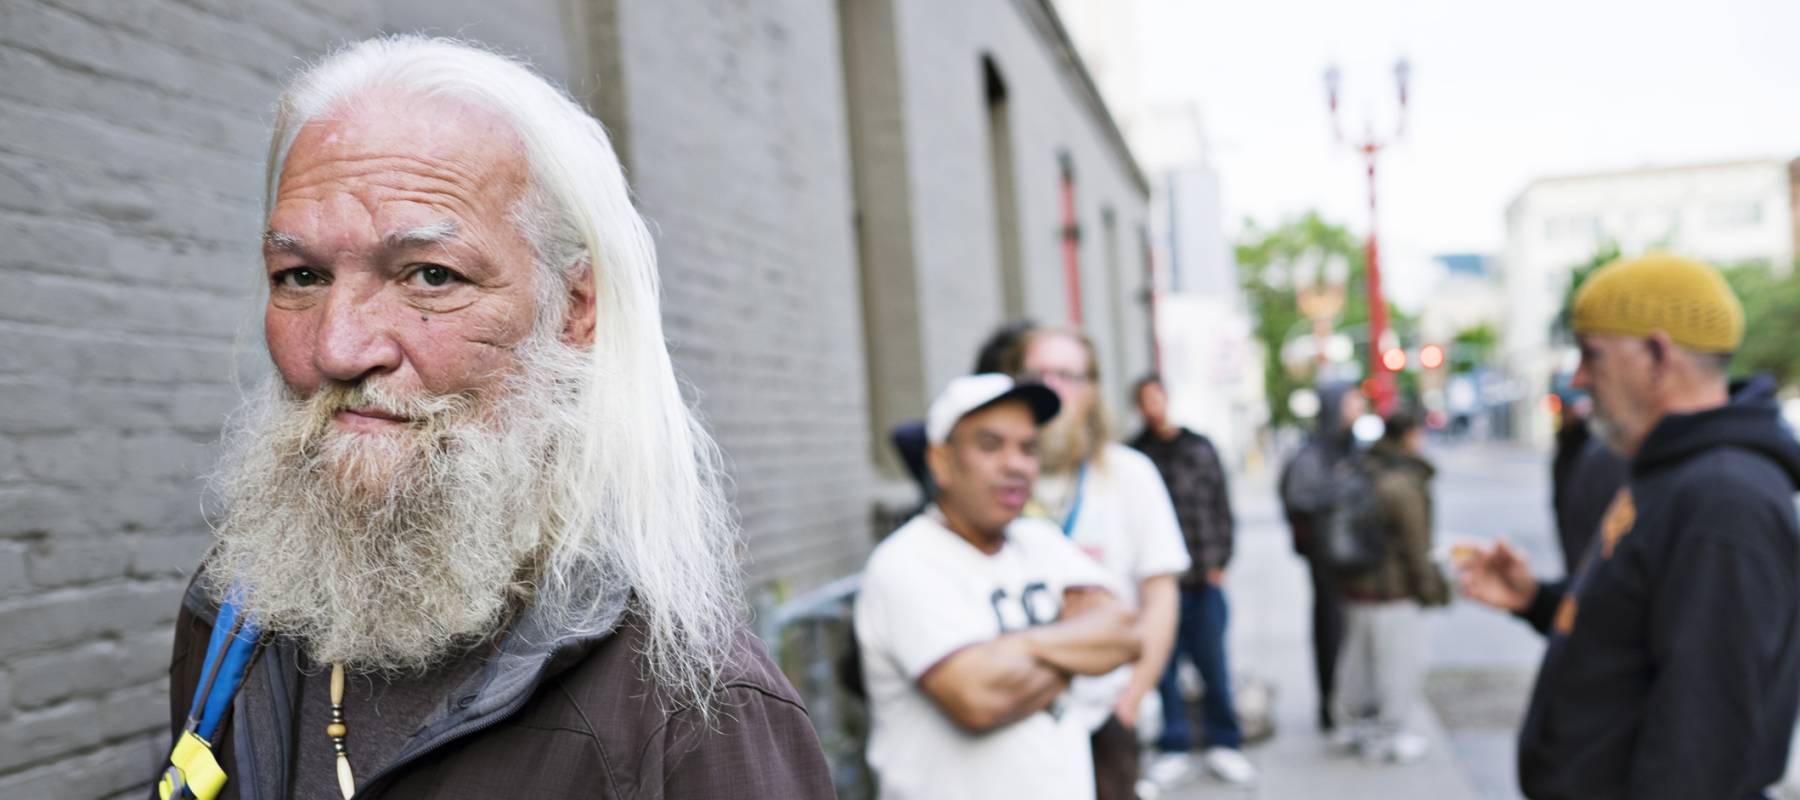 Homeless men wait in line for a shelter to open.